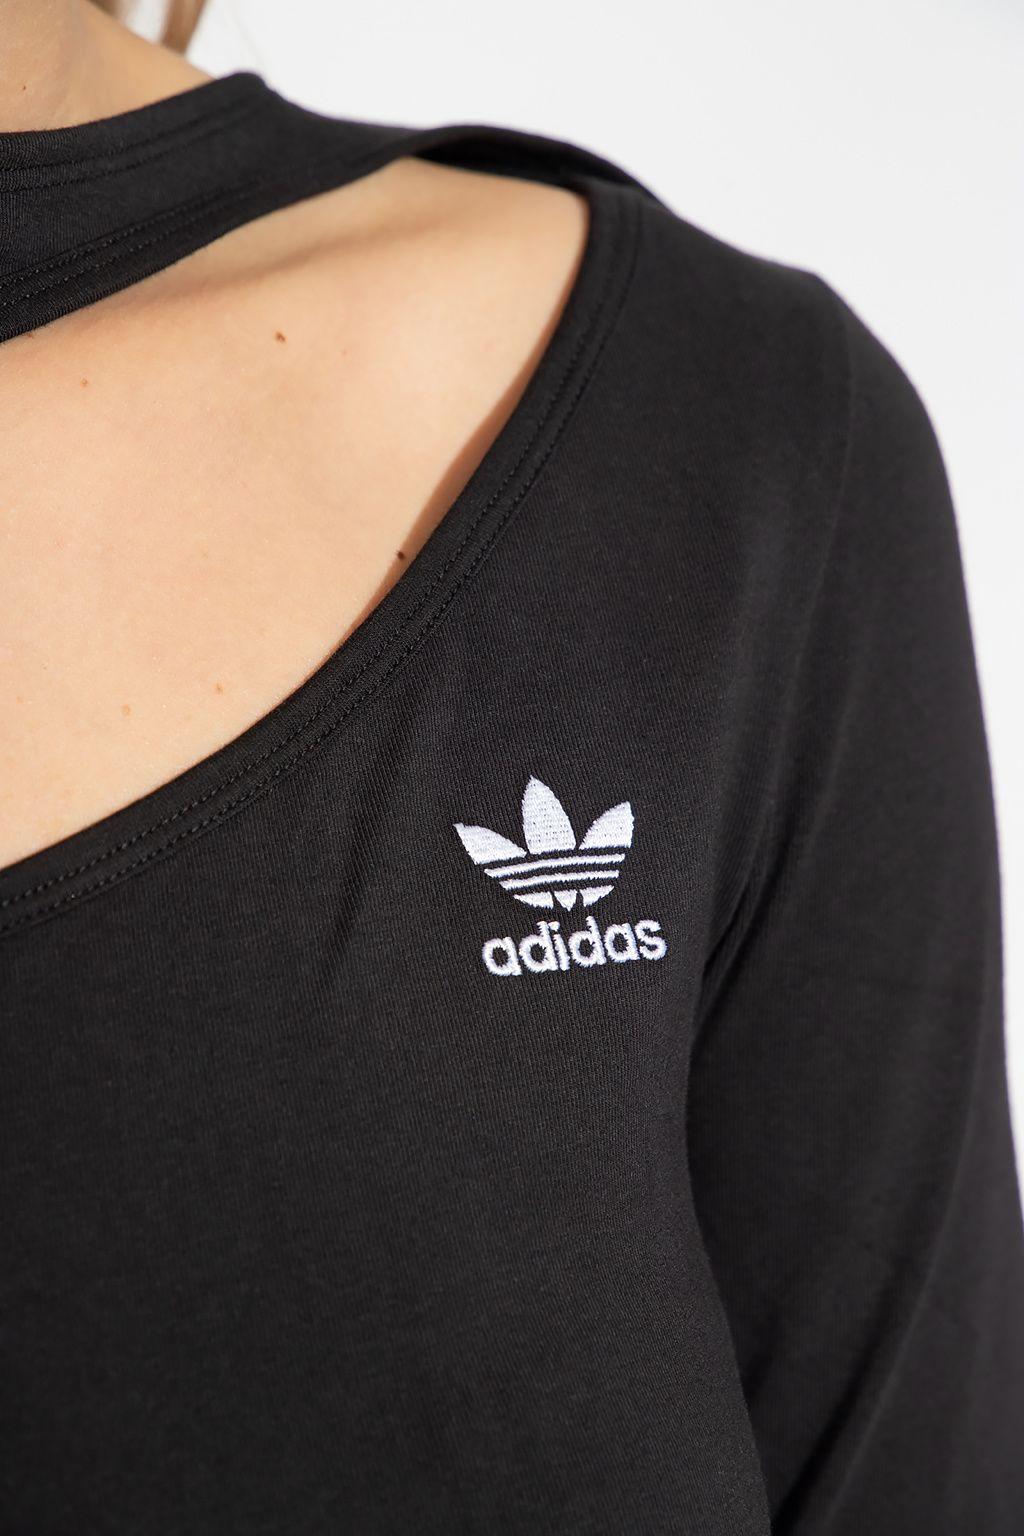 adidas Originals Top With Cut-out in Black | Lyst